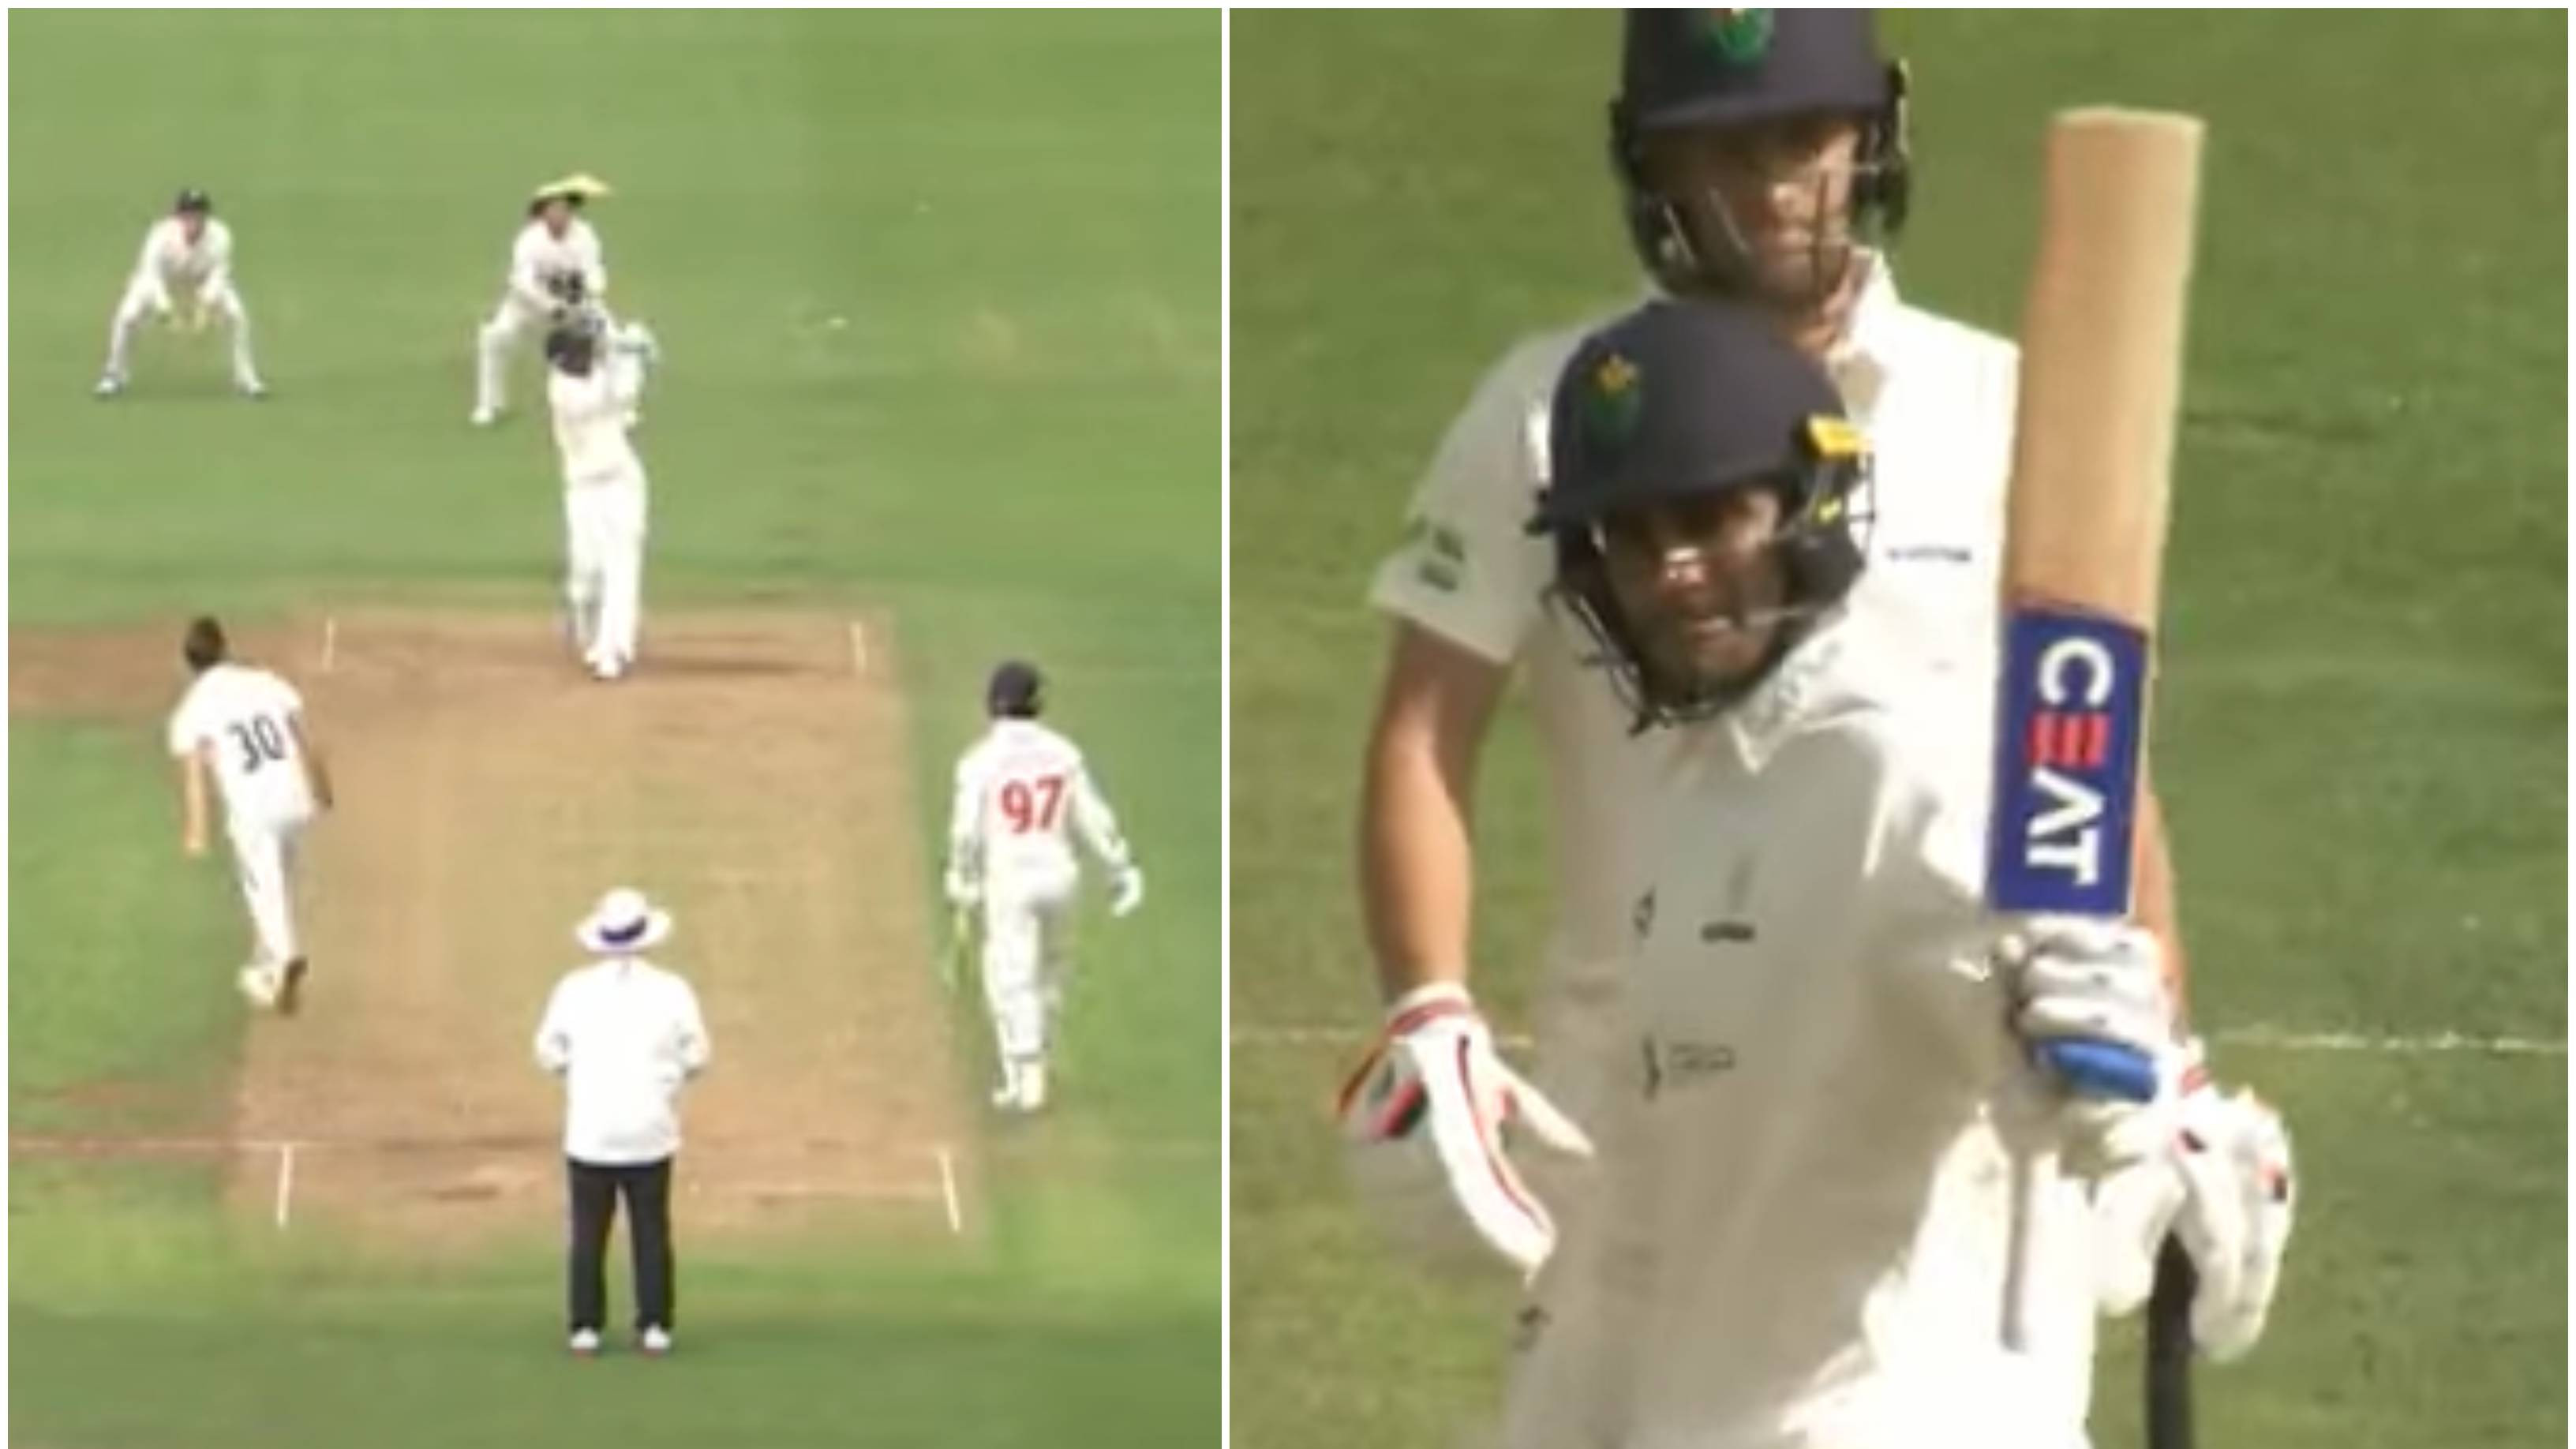 WATCH: Shubman Gill’s stunning 92 on County Championship debut for Glamorgan versus Worcestershire